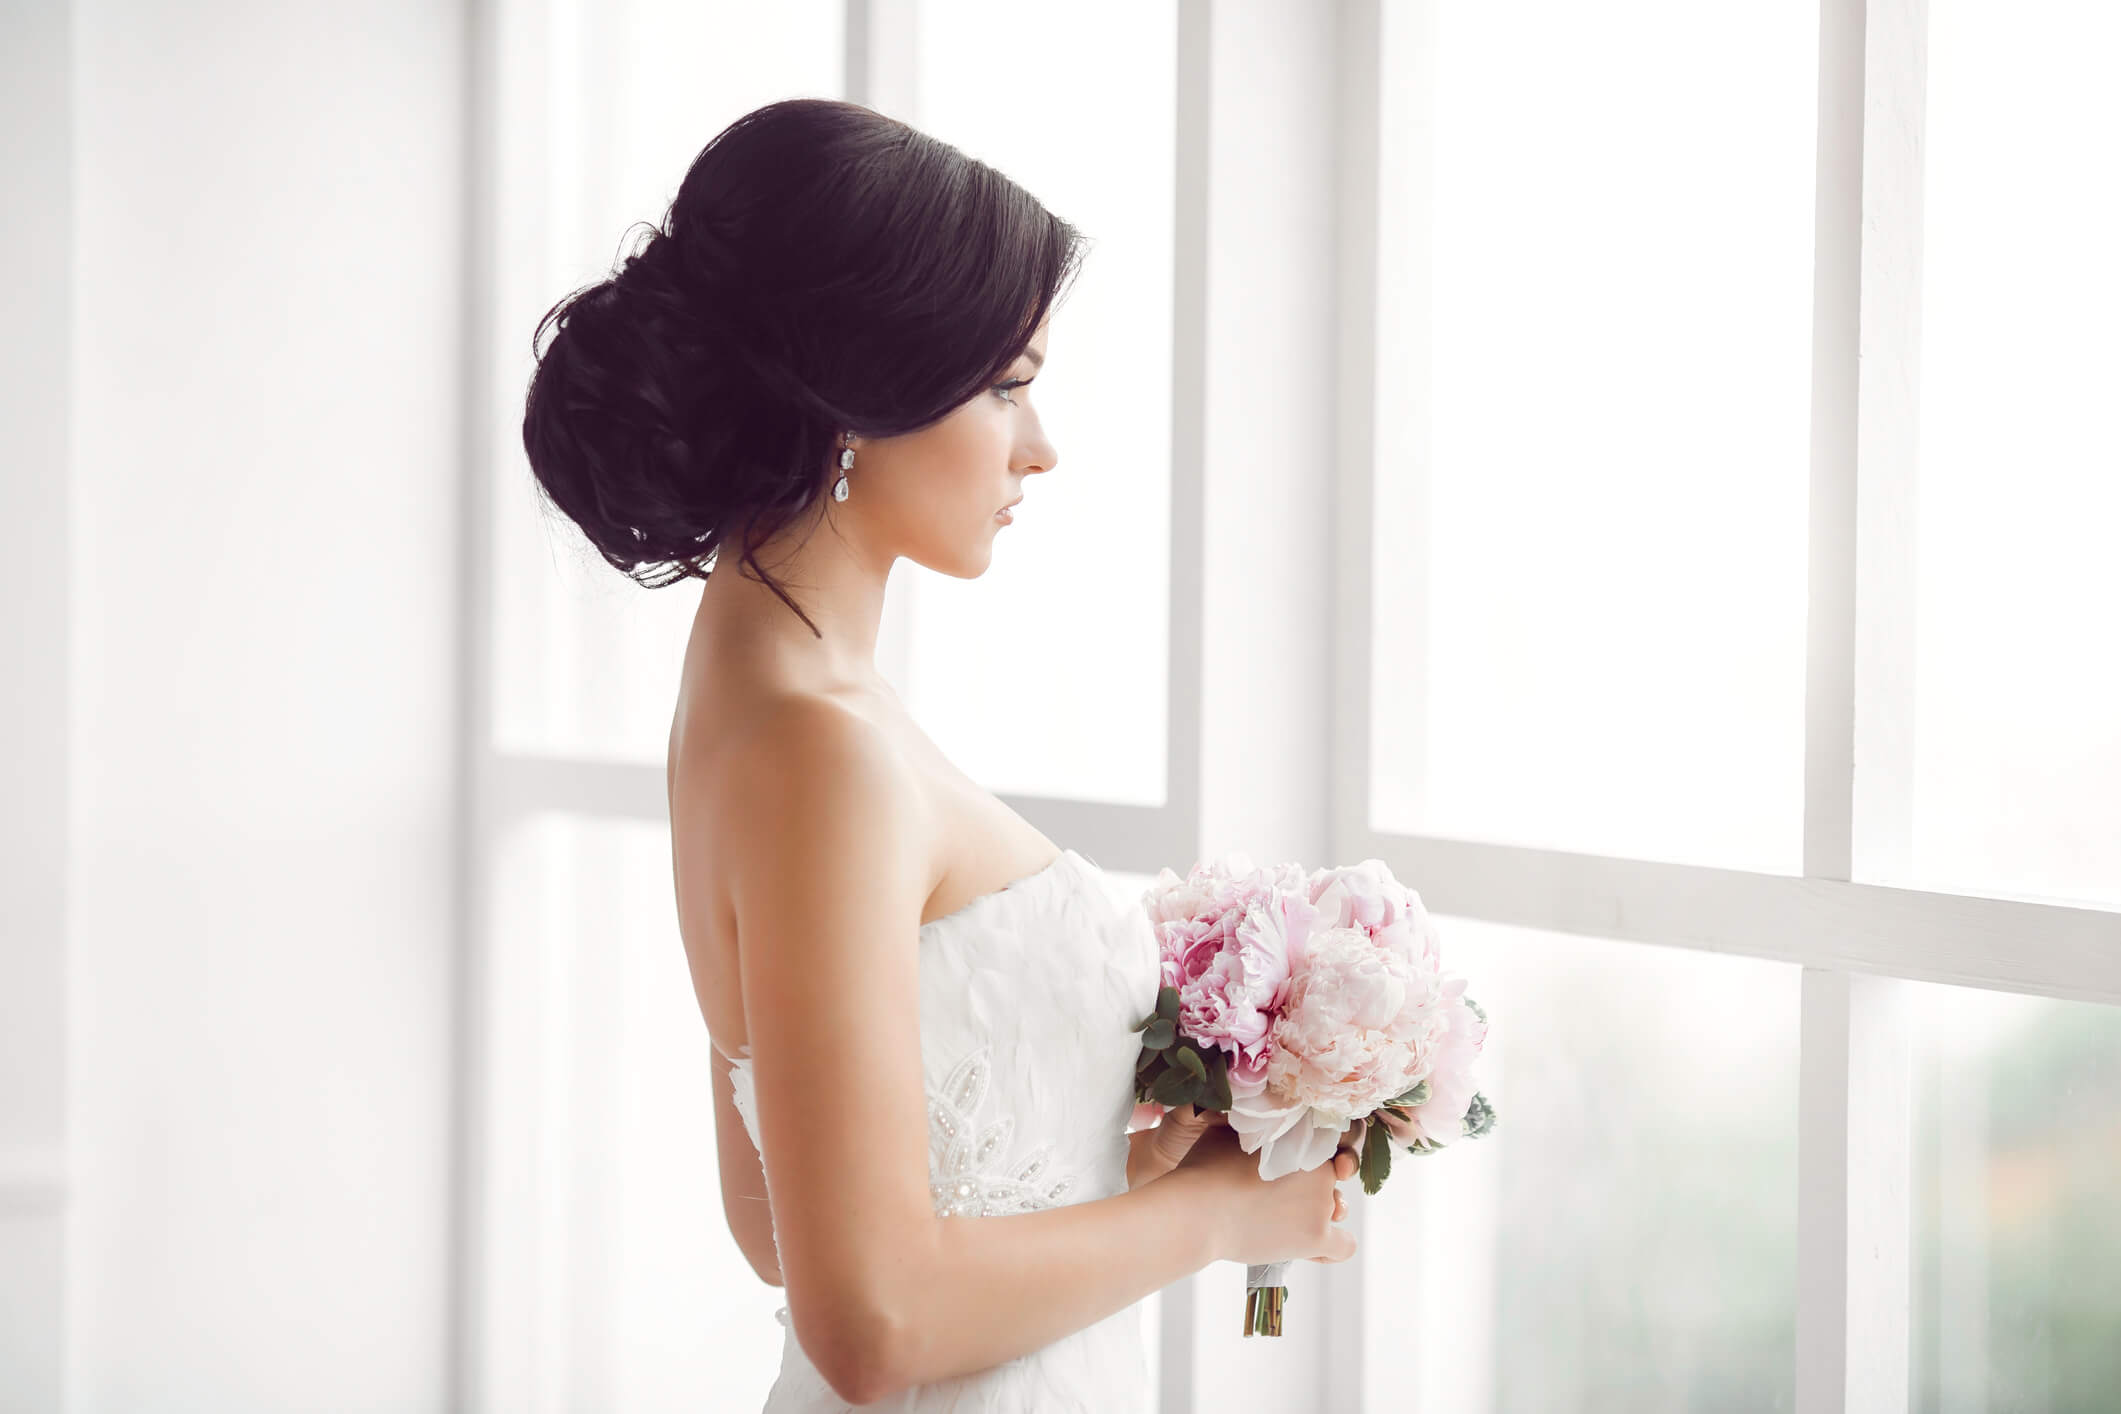 stunning-young-bride-holding-bouquet-beautiful-wedding-hairstyle-make-up-luxury-fashion-dress-flowers-attractive